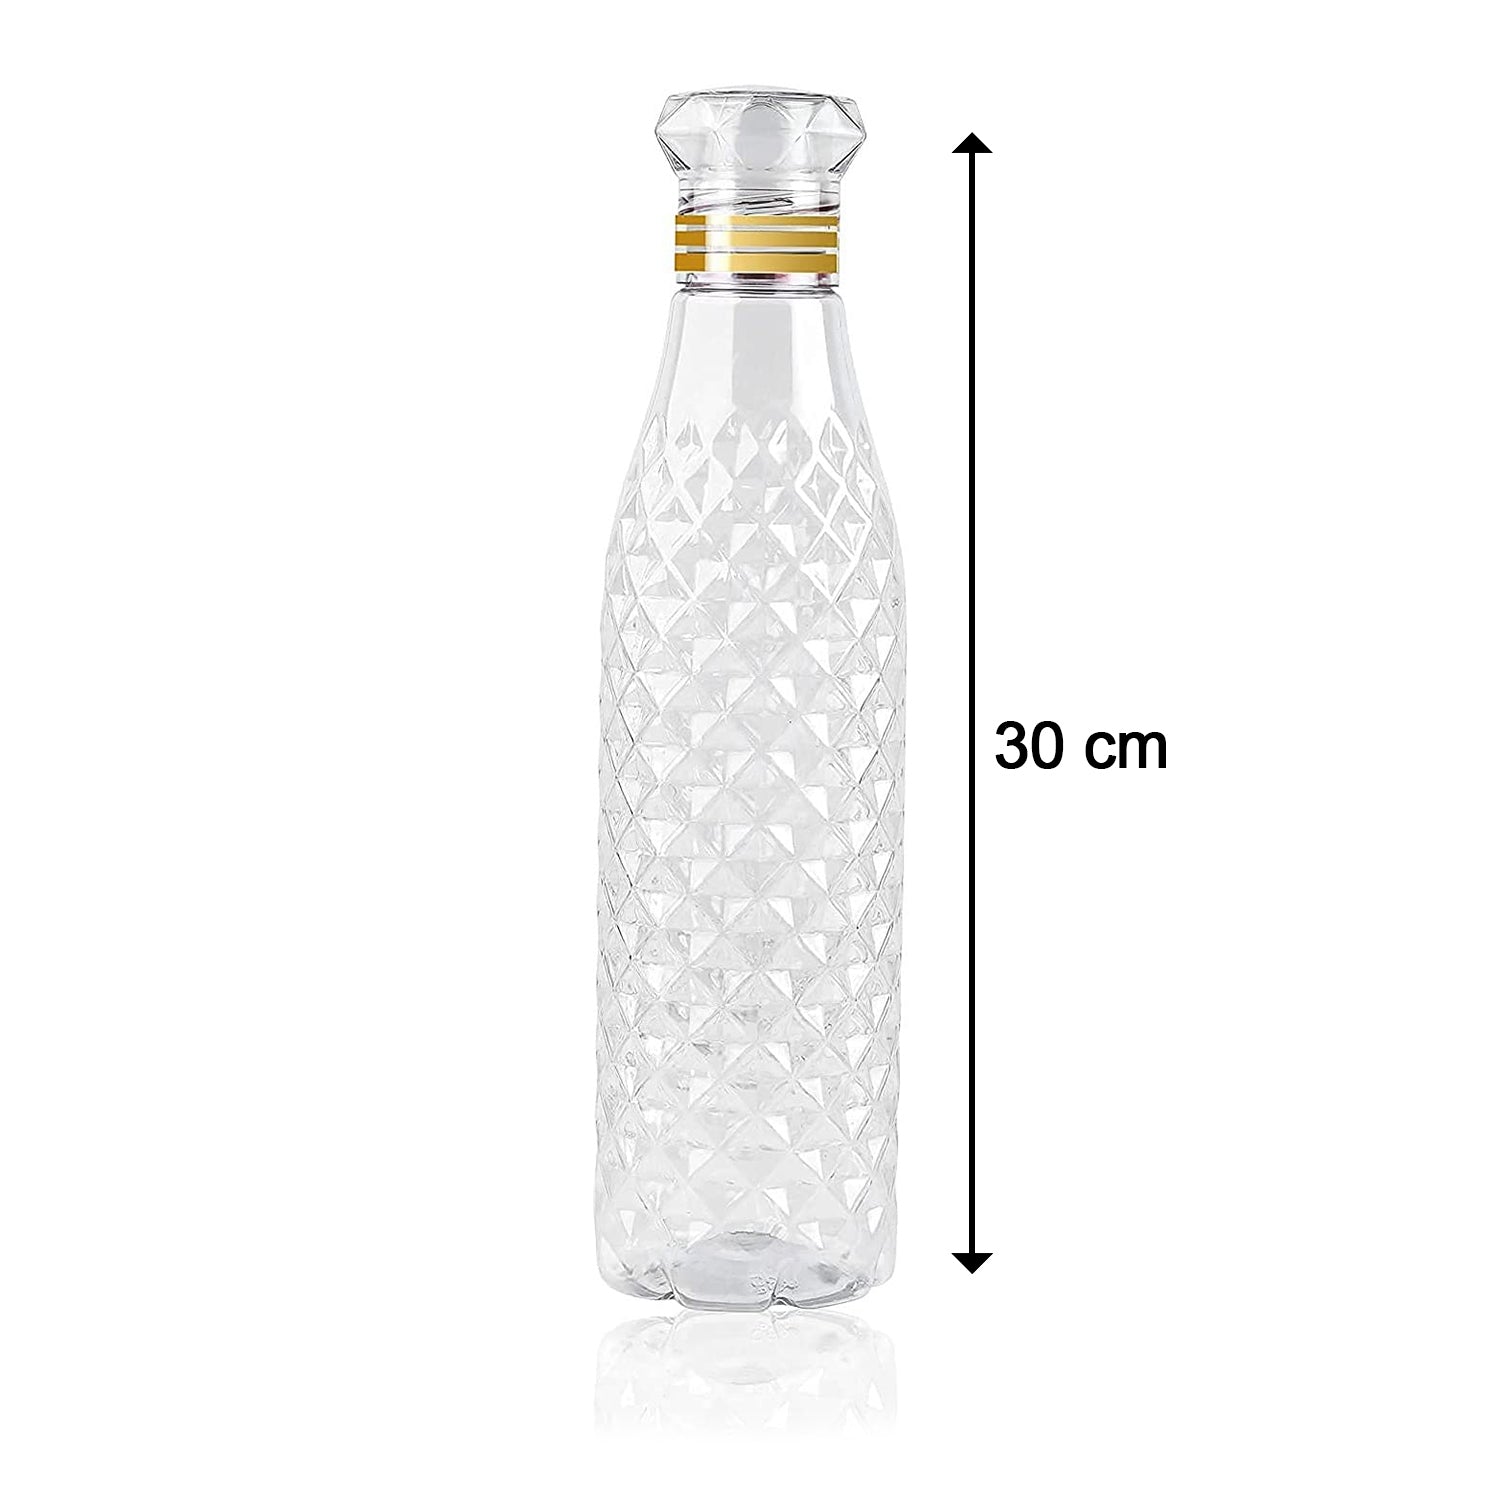 2720 Dimond Cut Water Bottle used by kids, children’s and even adults for storing and drinking water throughout travelling to different-different places and all.